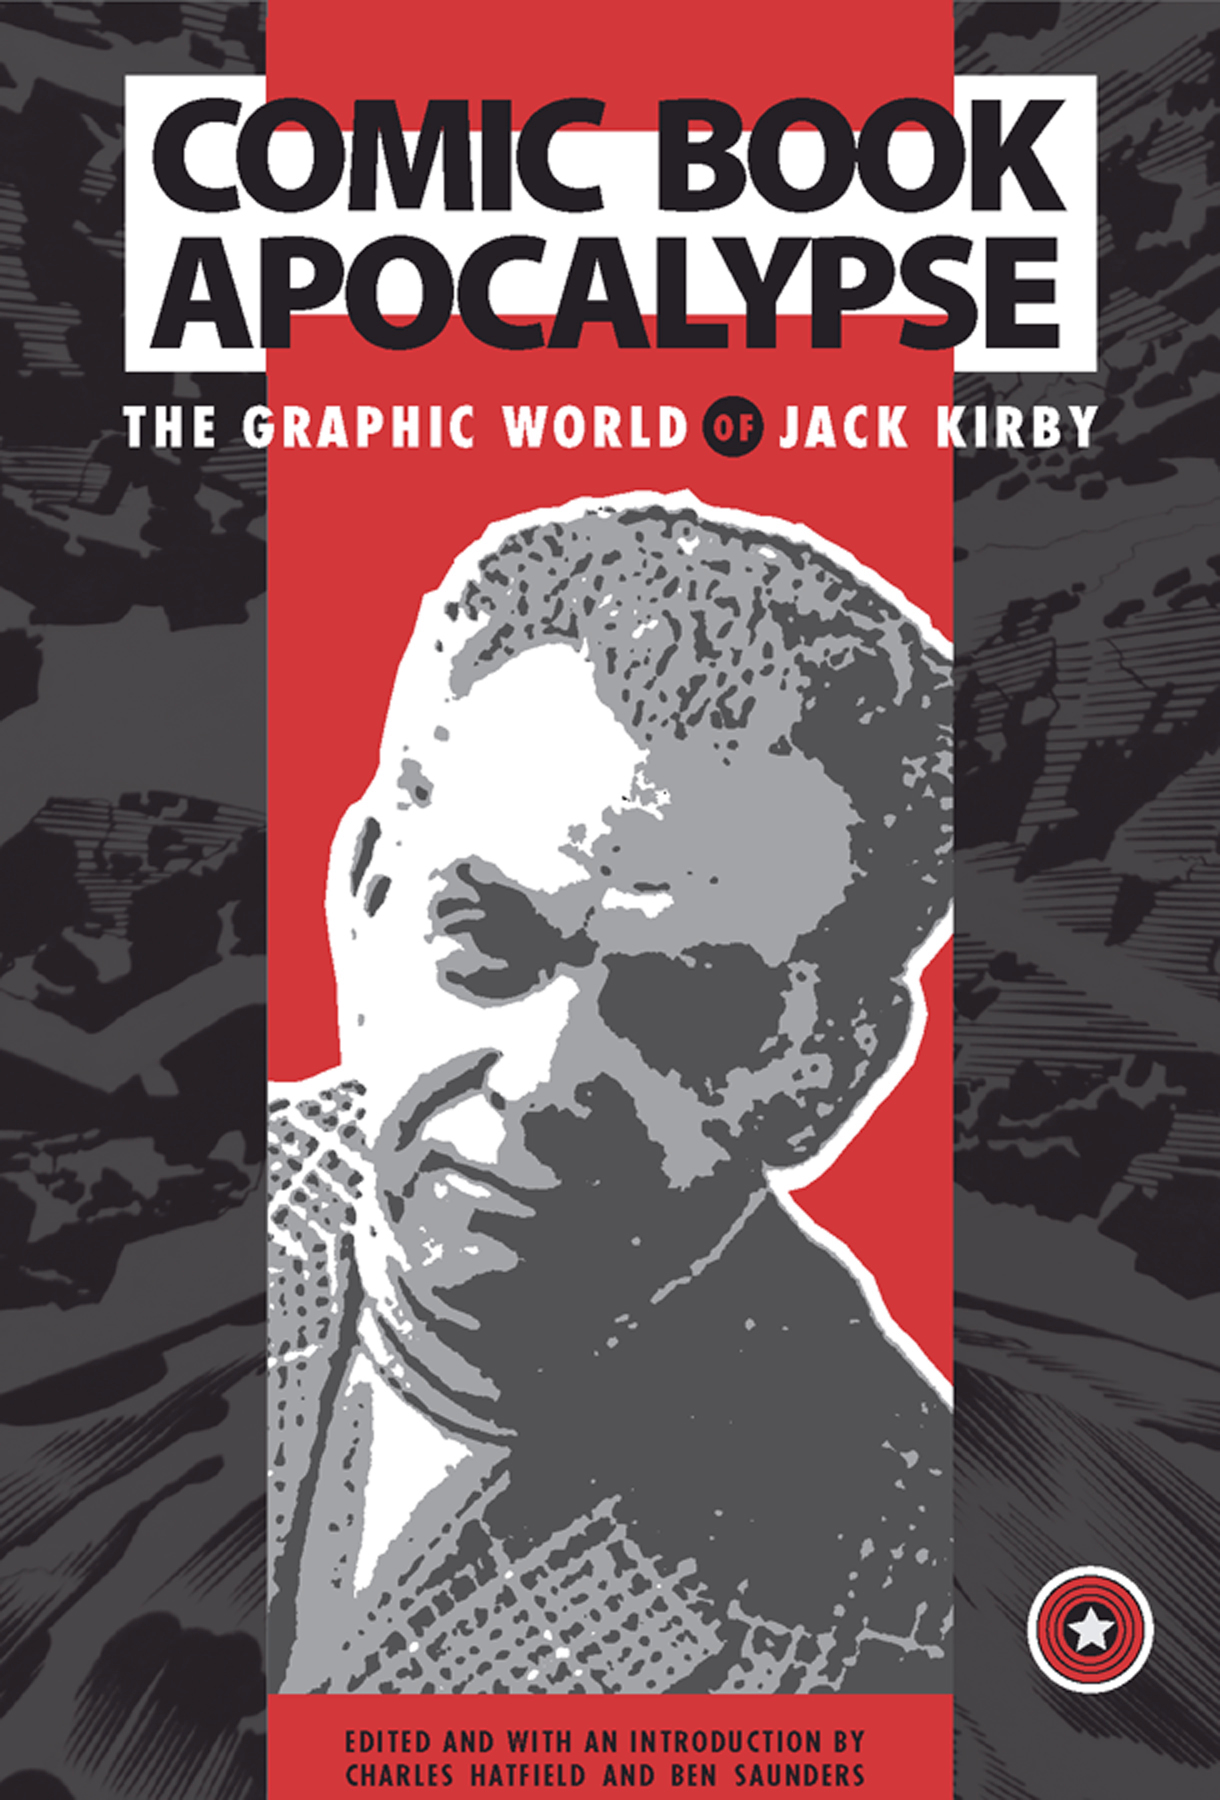 COMIC BOOK APOCALYPSE GRAPHIC WORLD OF JACK KIRBY TP